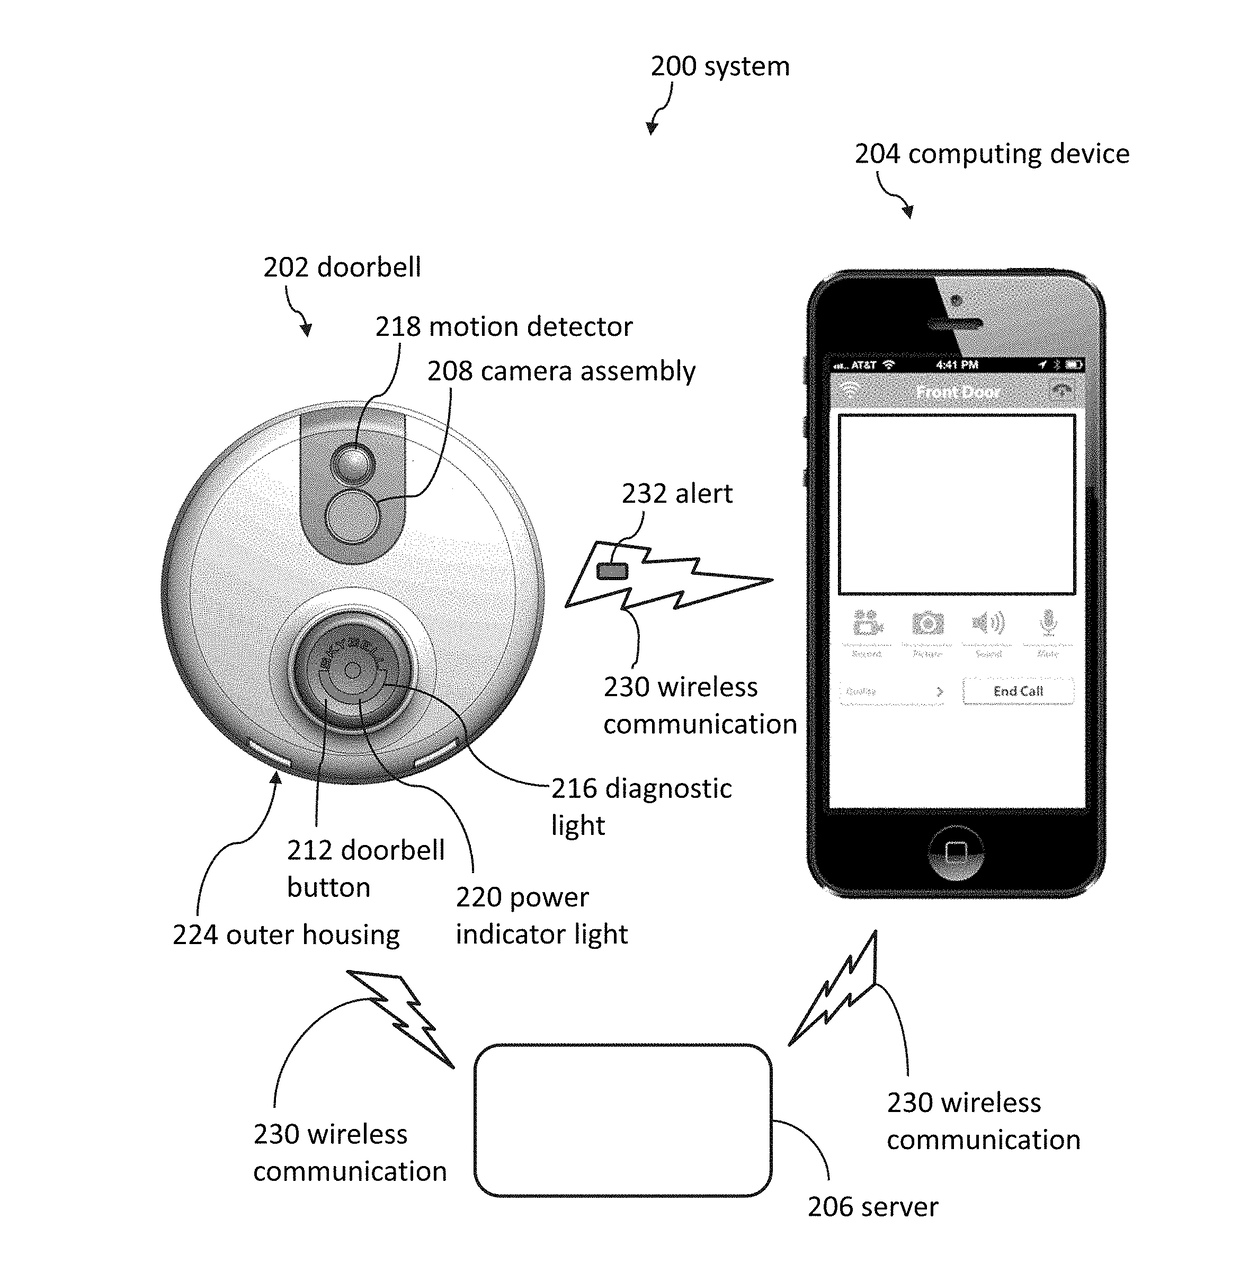 Doorbell chime systems and methods